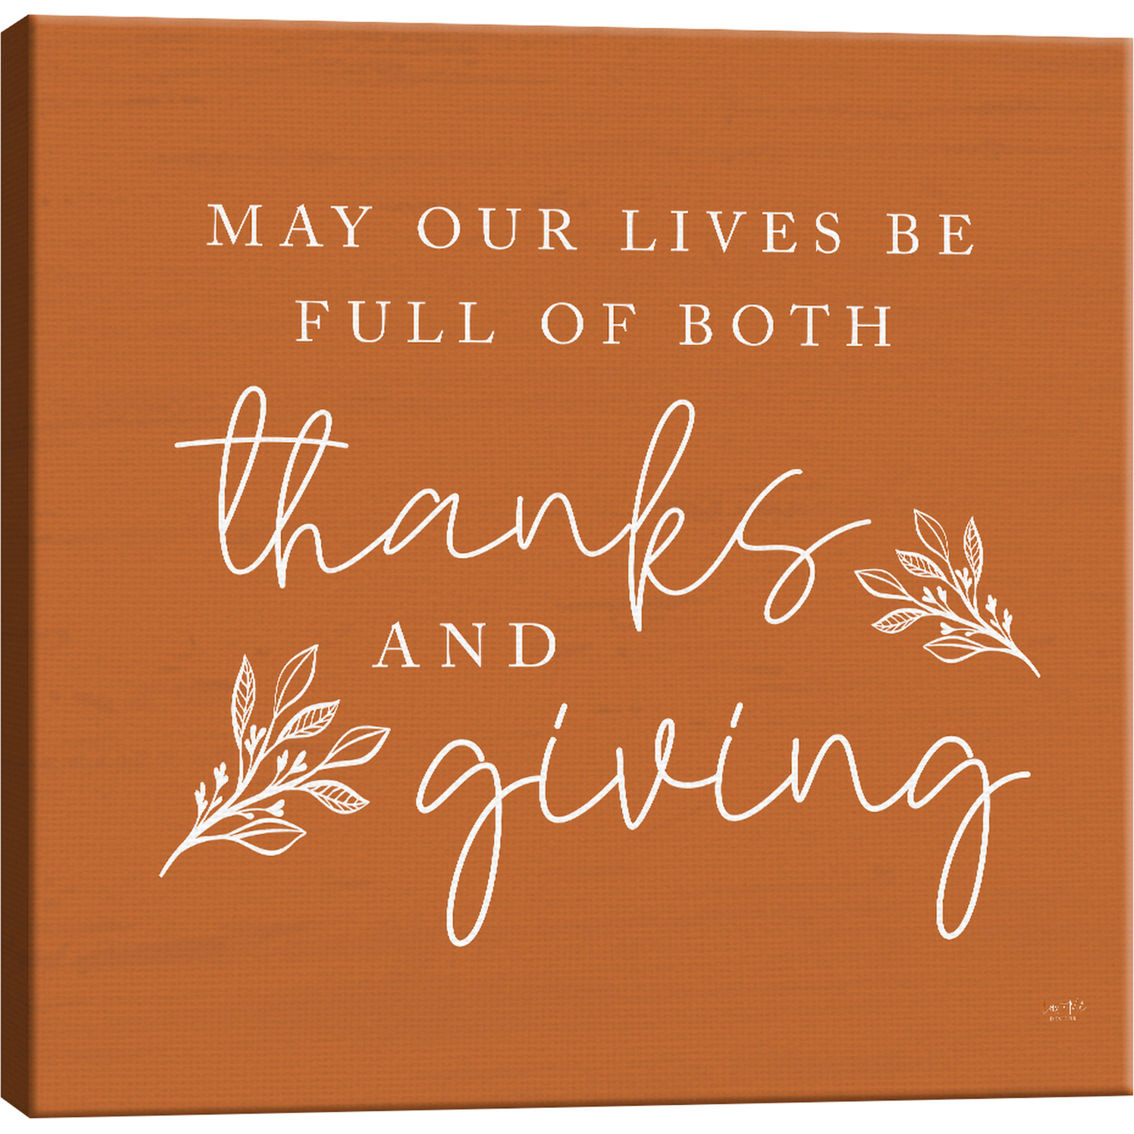 Inkstry Thanksgiving May Our Lives Giclee Gallery Wrap Canvas Print - Image 2 of 3